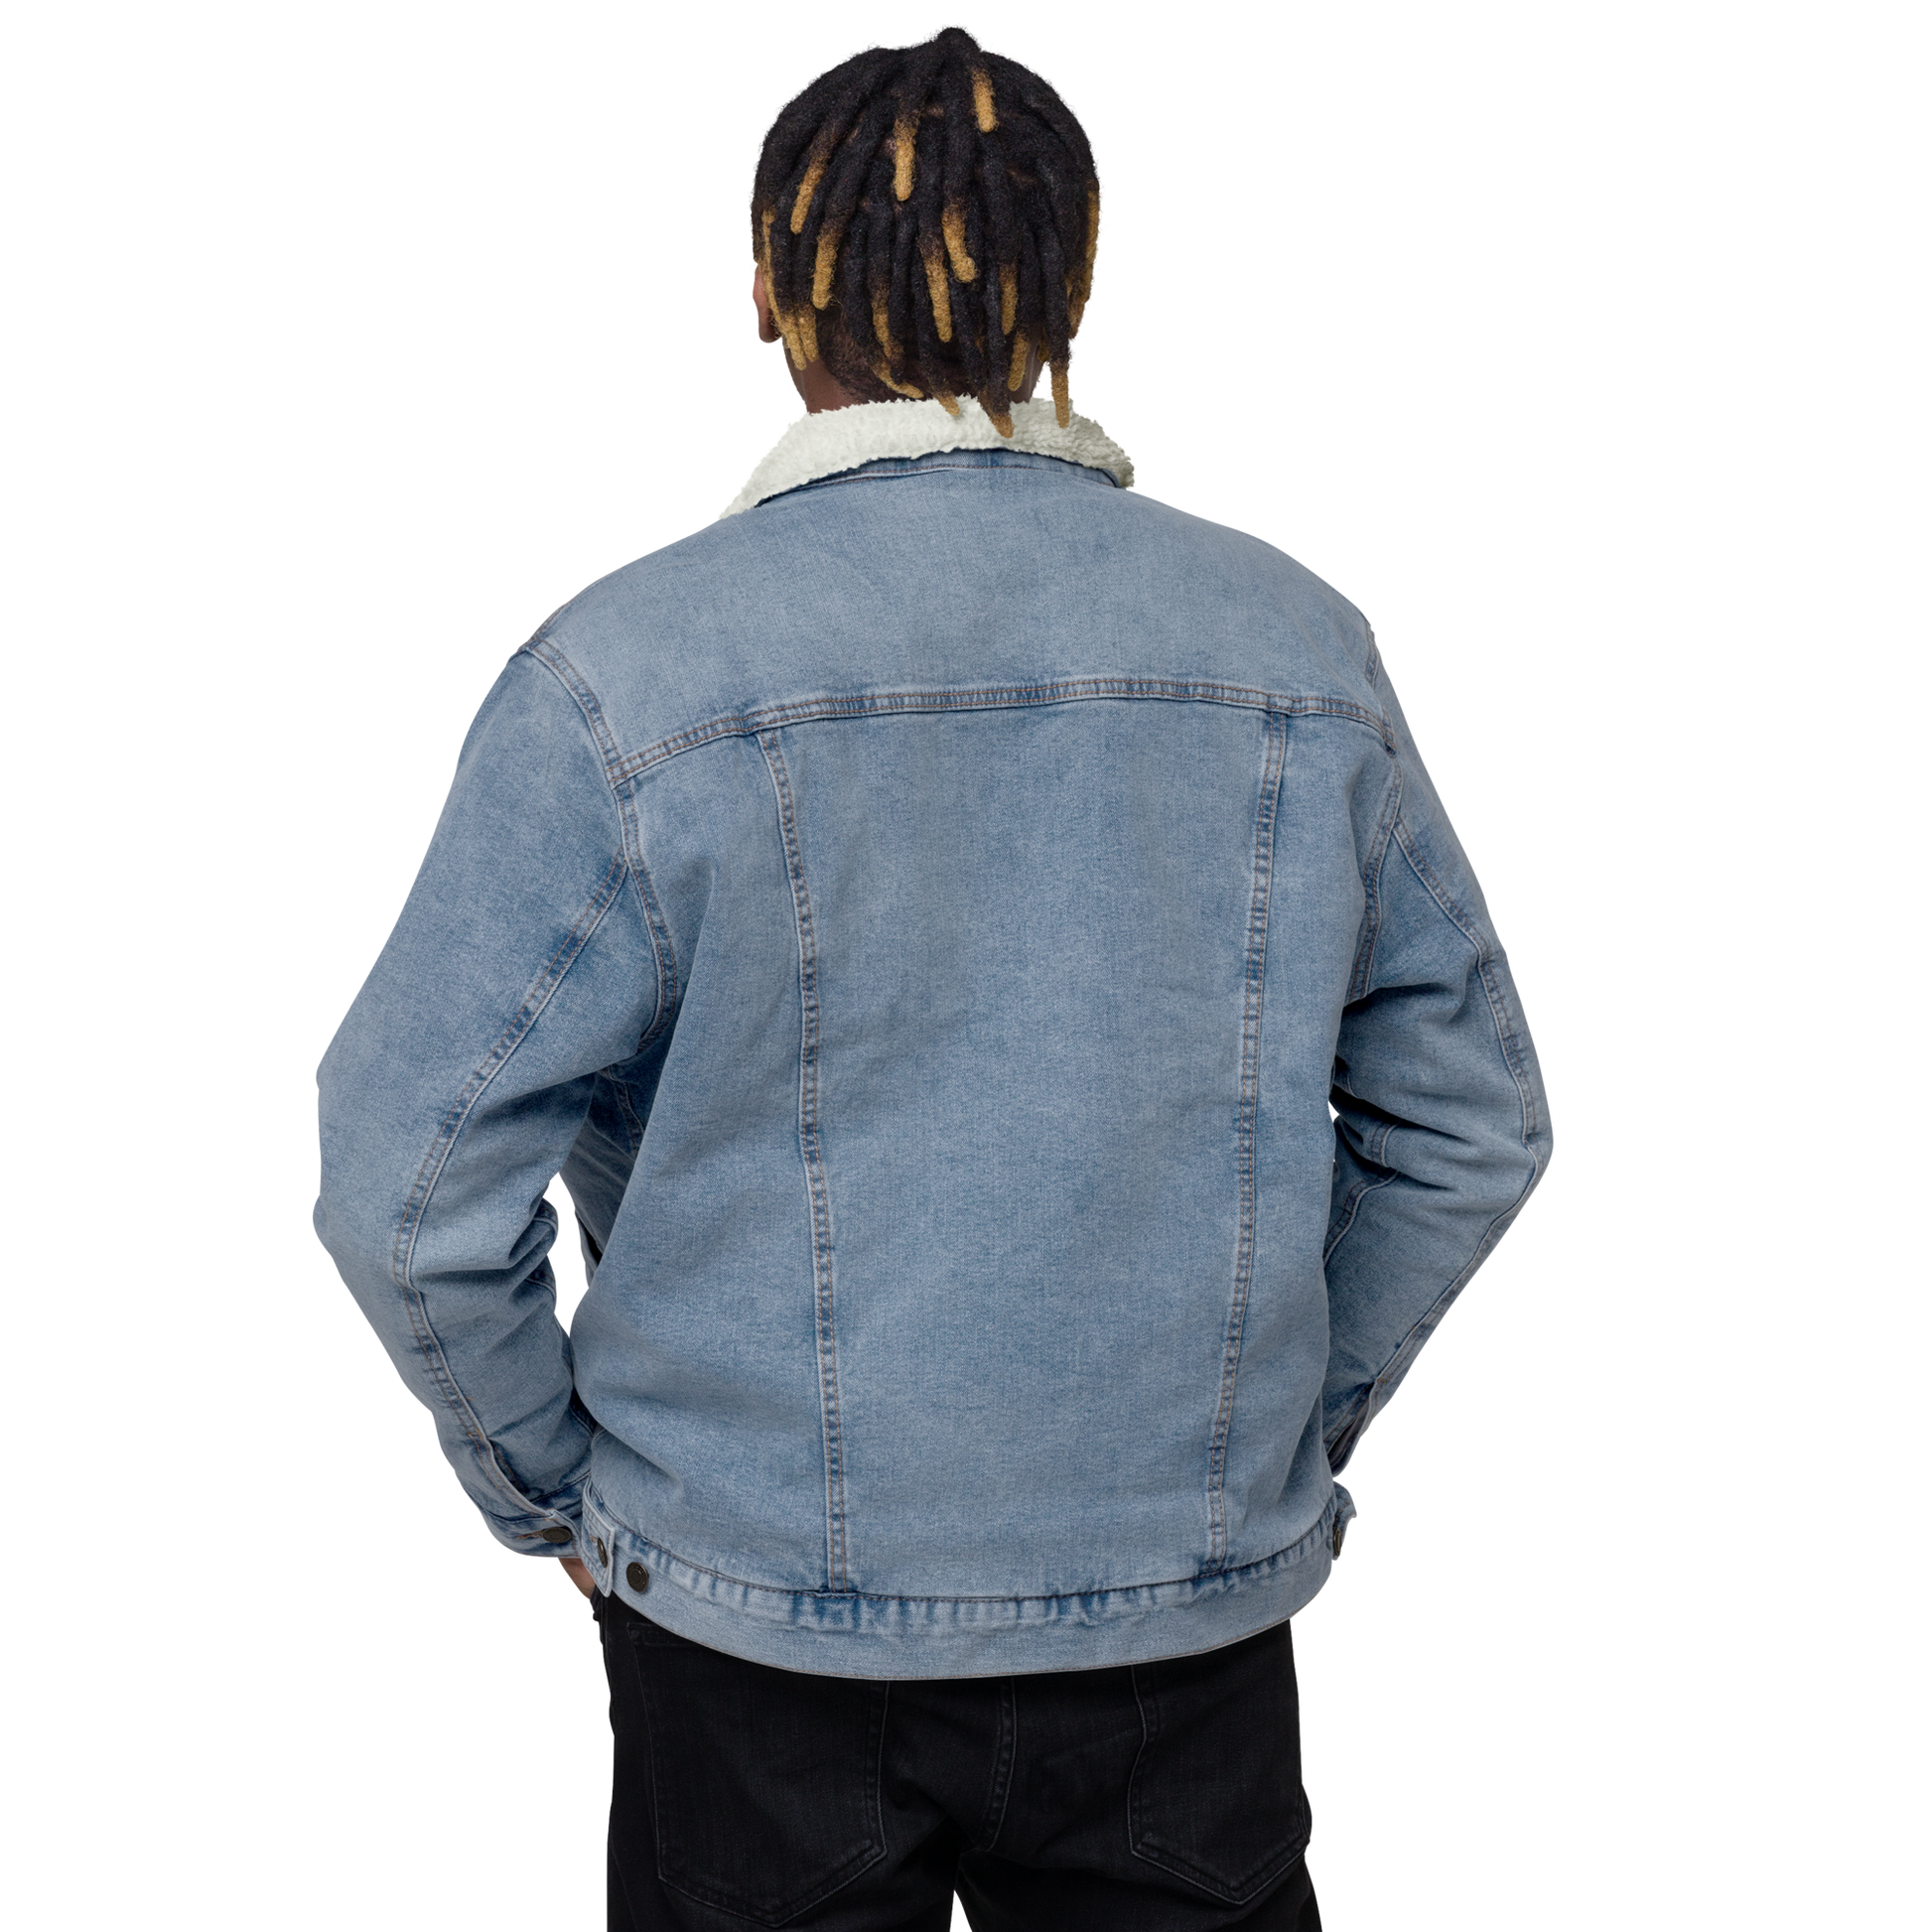 YHM Designs - YQT Thunder Bay Denim Sherpa Jacket - Crossed-X Design with Airport Code and Vintage Propliner - Black & White Embroidery - Image 12